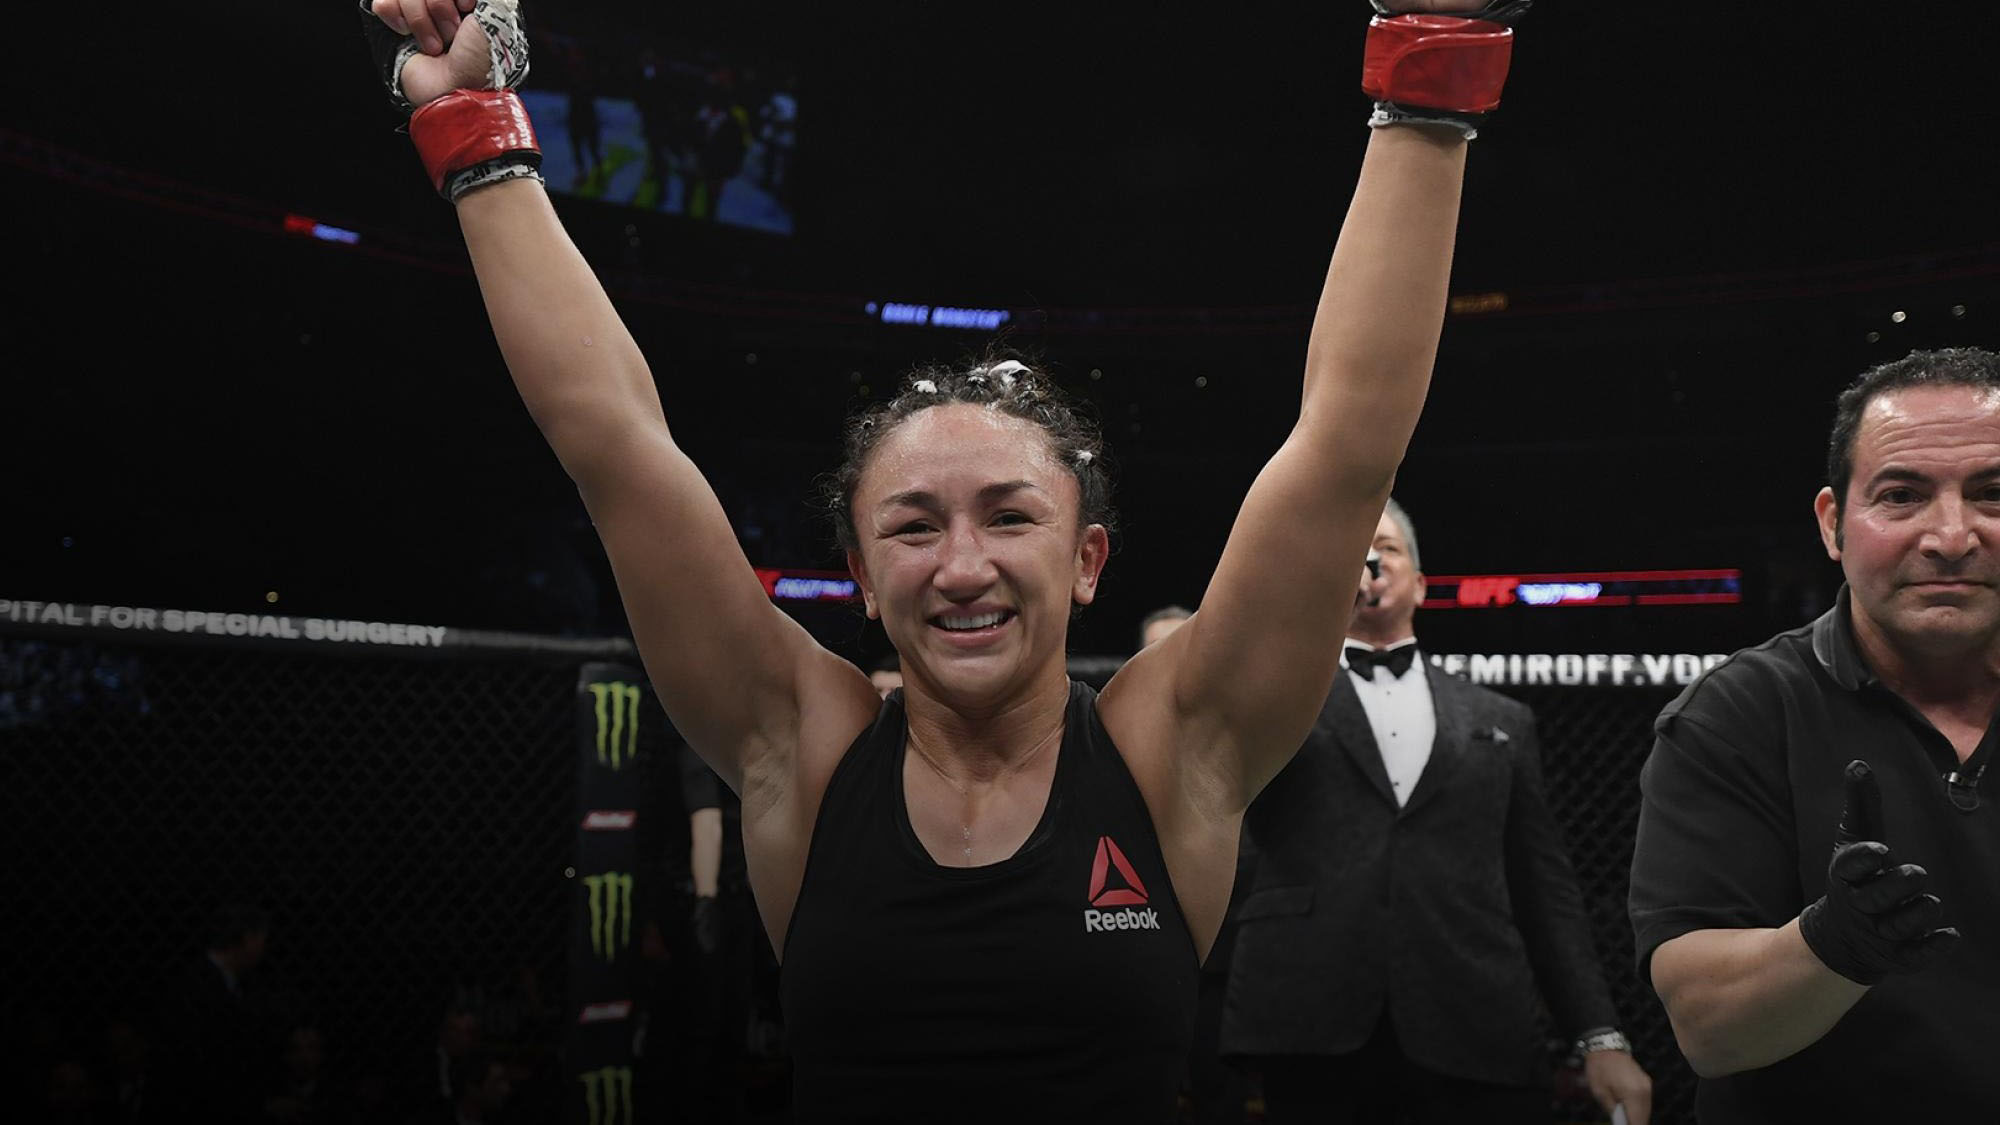 Carla Kristen Esparza (born October 10, 1987) is an American professional mixed martial artist who competes in the Strawweight division of the Ultimat...